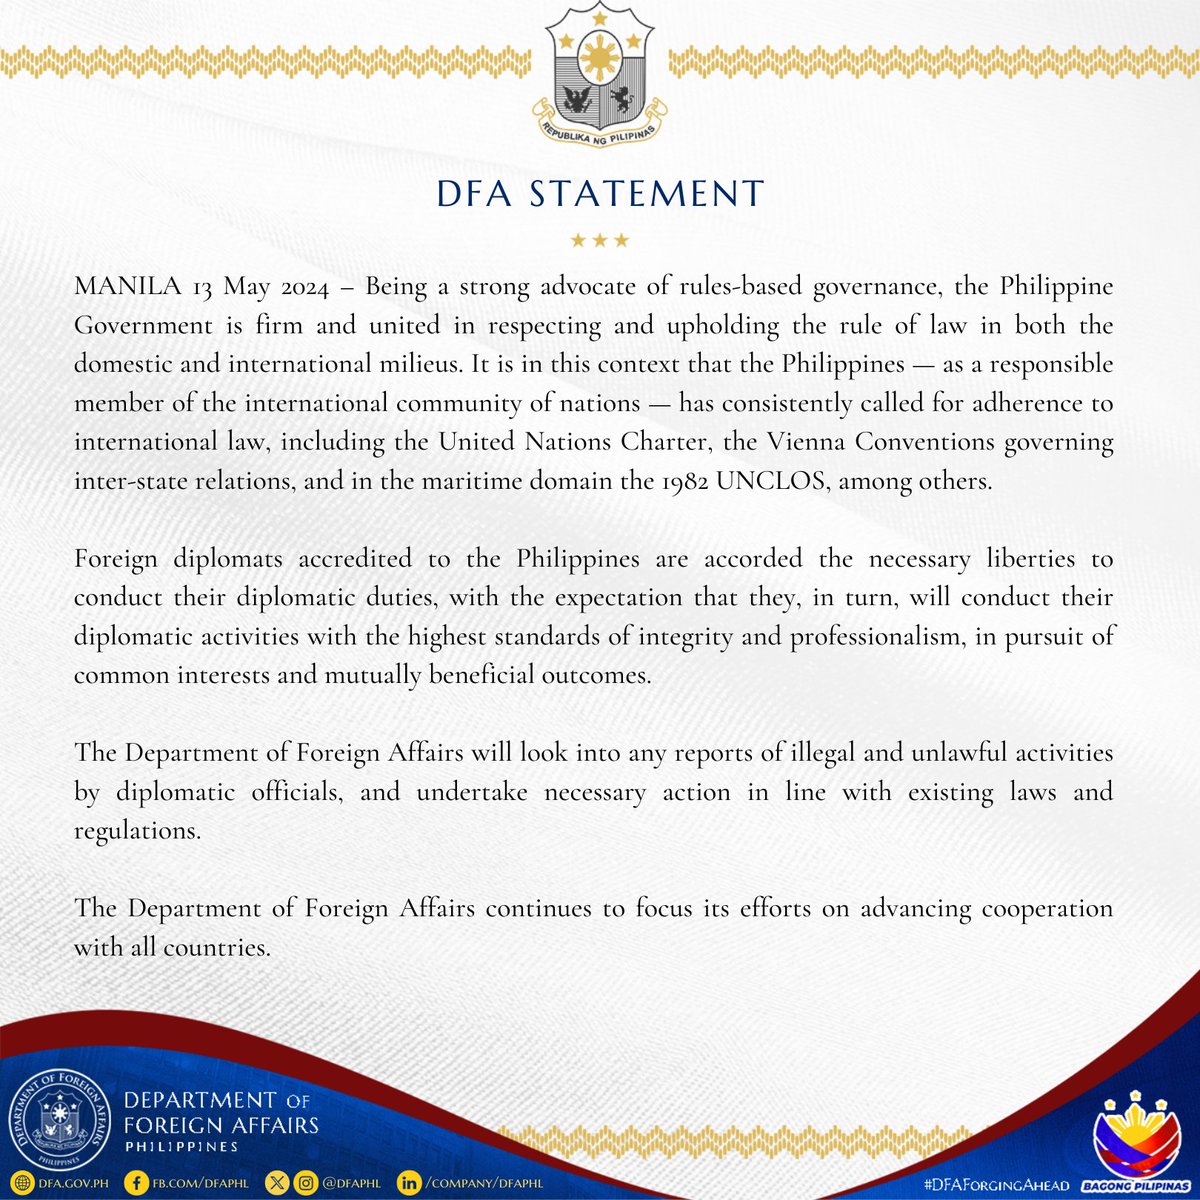 READ #DFAStatement: Being a strong advocate of rules-based governance, the Philippine Government is firm and united in respecting and upholding the rule of law in both the domestic and international milieus. Also found in this link 👉🏻 tinyurl.com/e5mzb59k #DFAForgingAhead